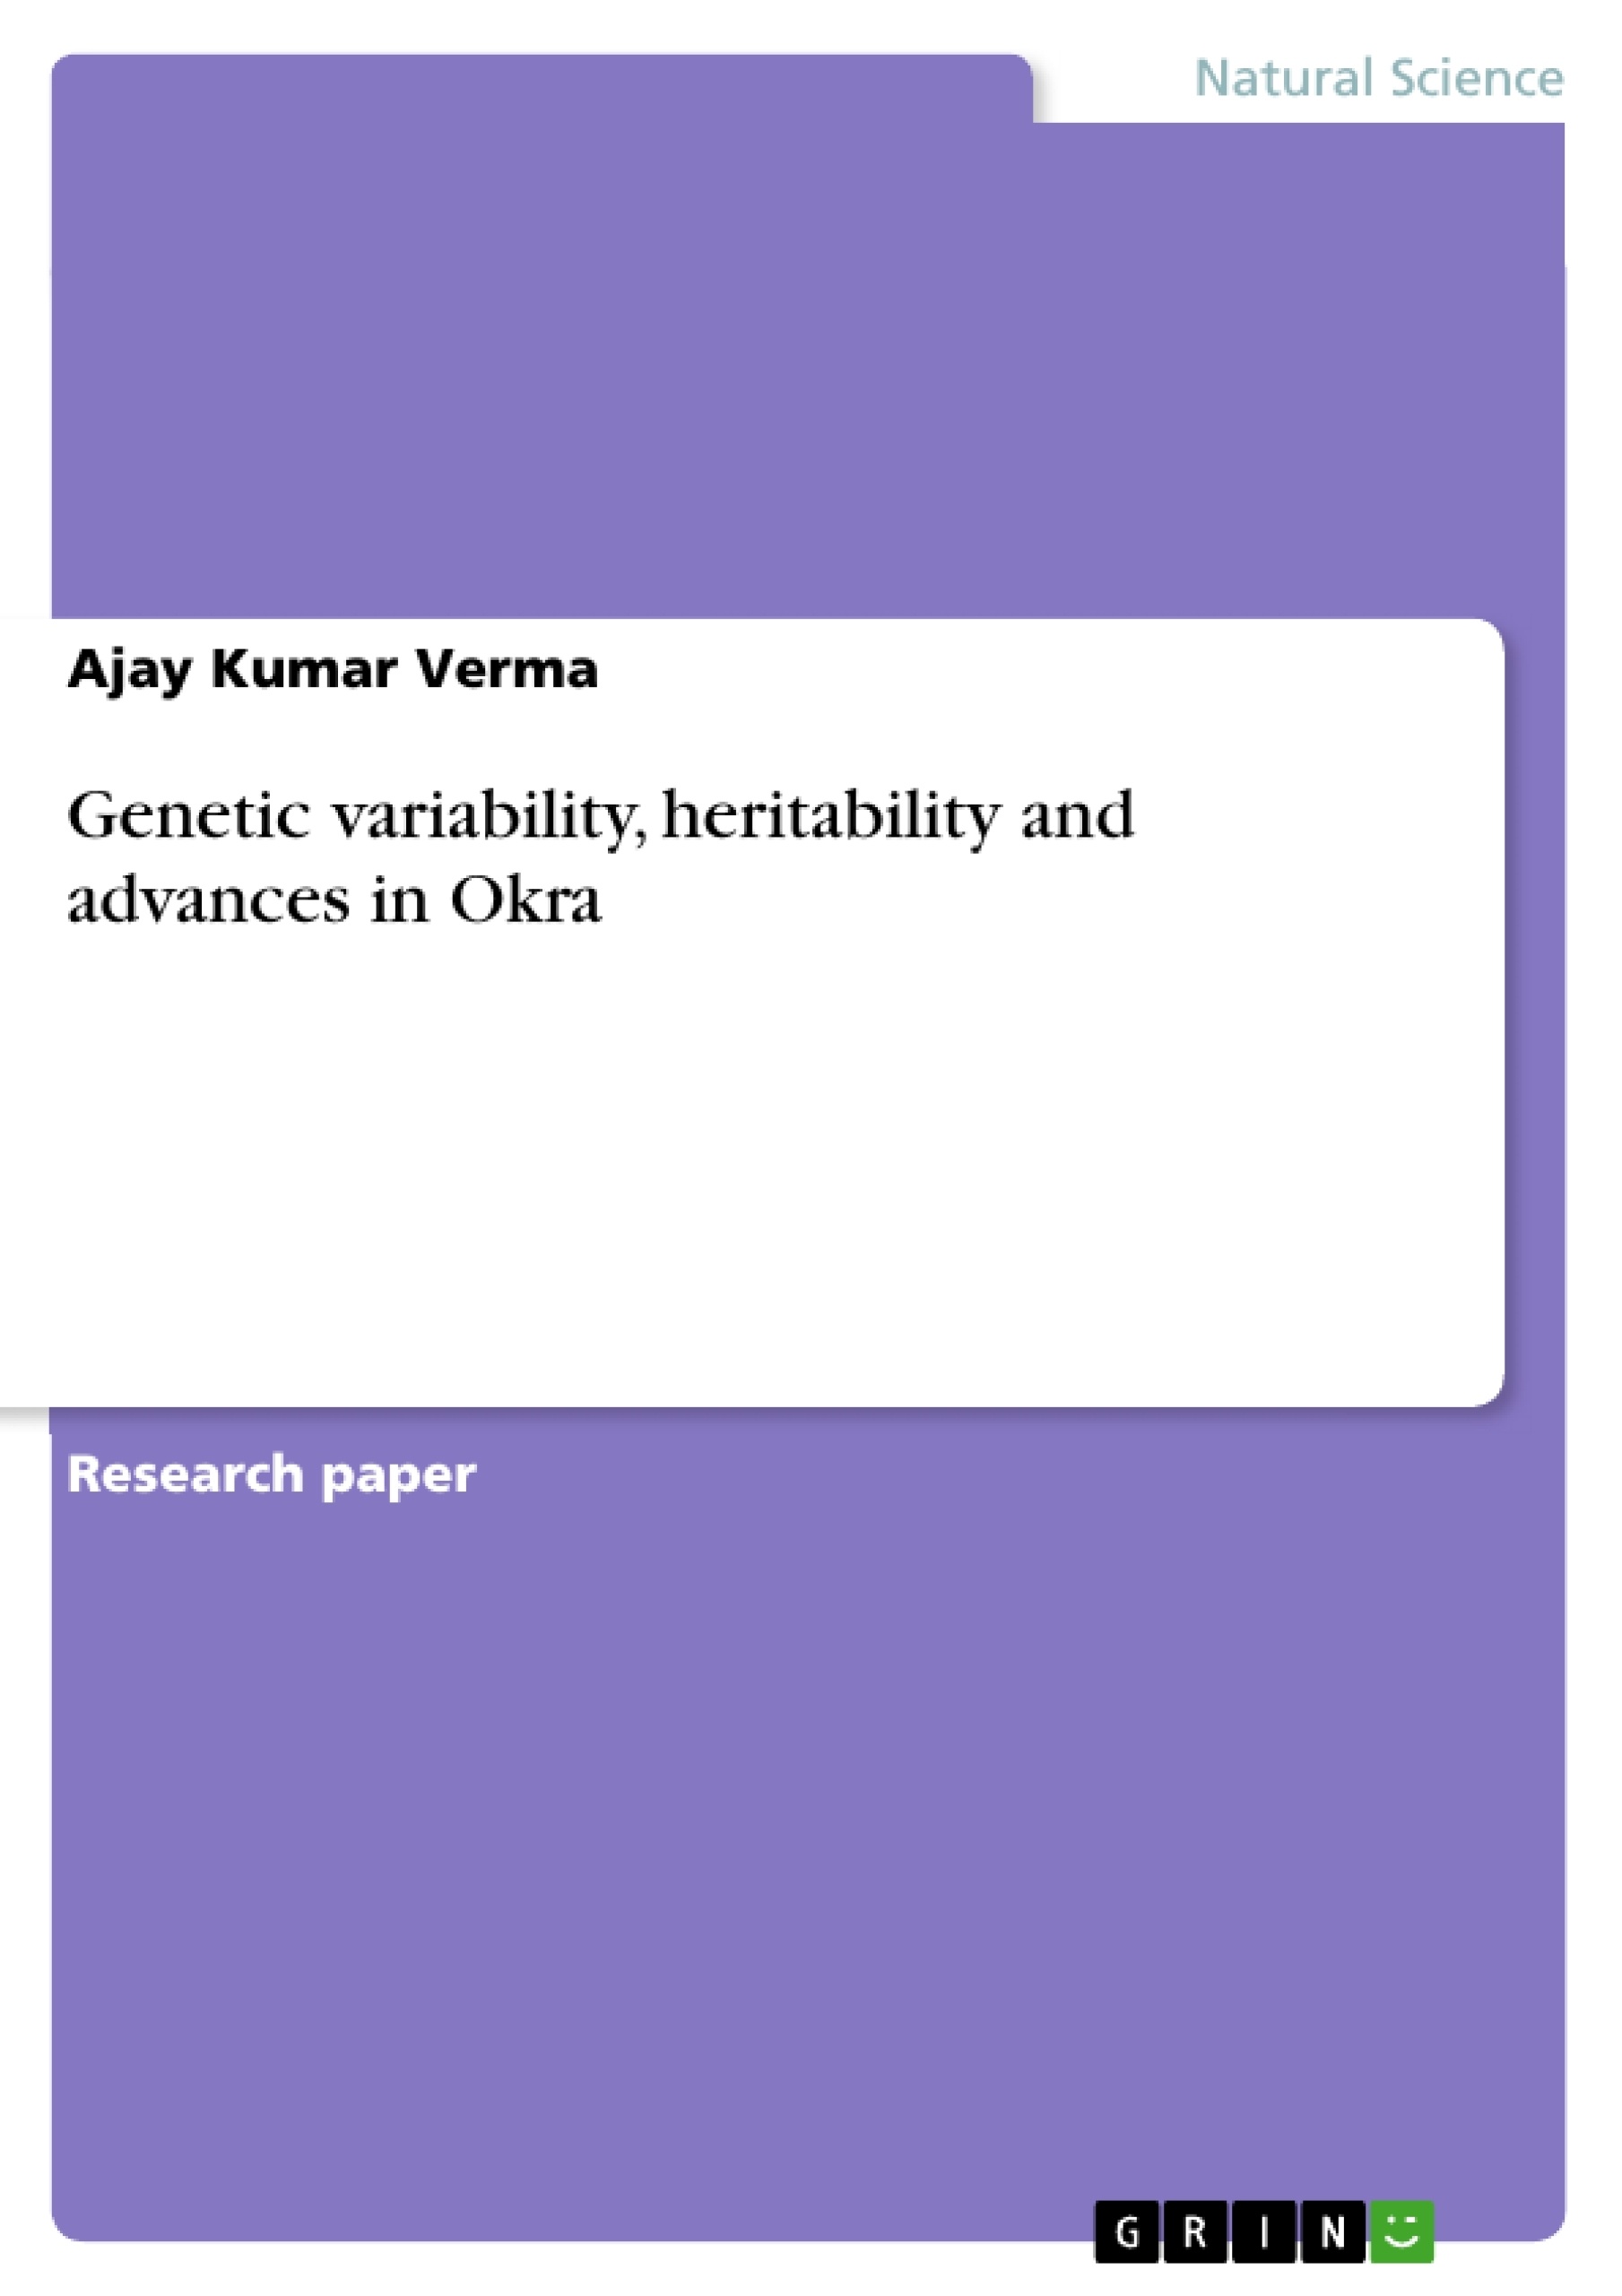 Título: Genetic variability, heritability and advances  in Okra